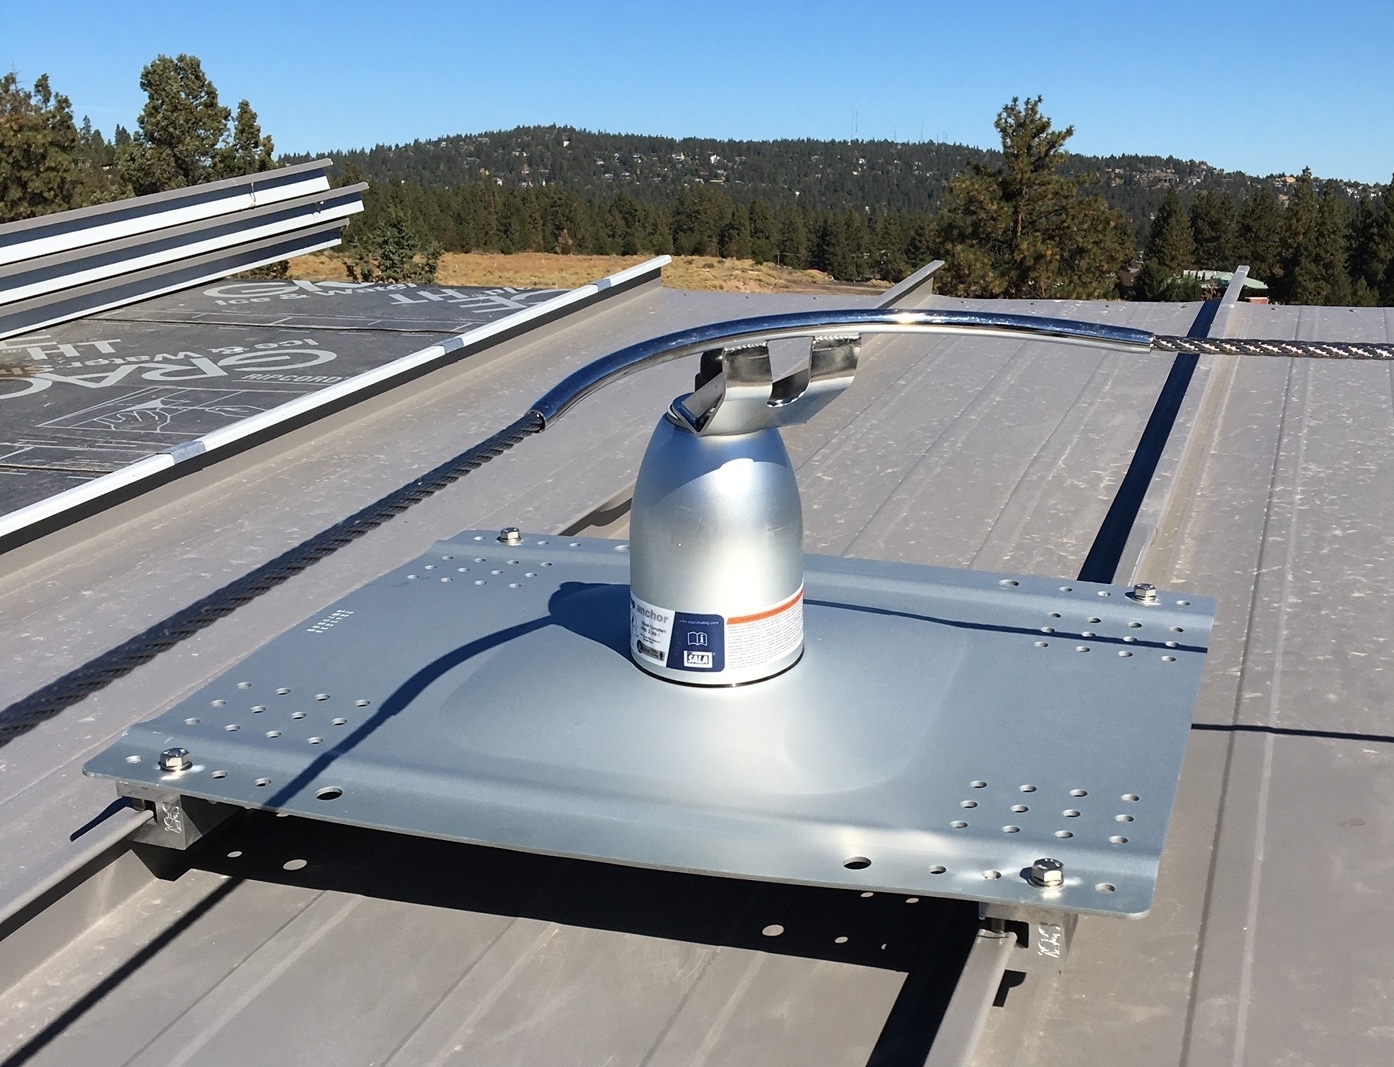  RoofSafe anchor on standing seam roof of a university building 